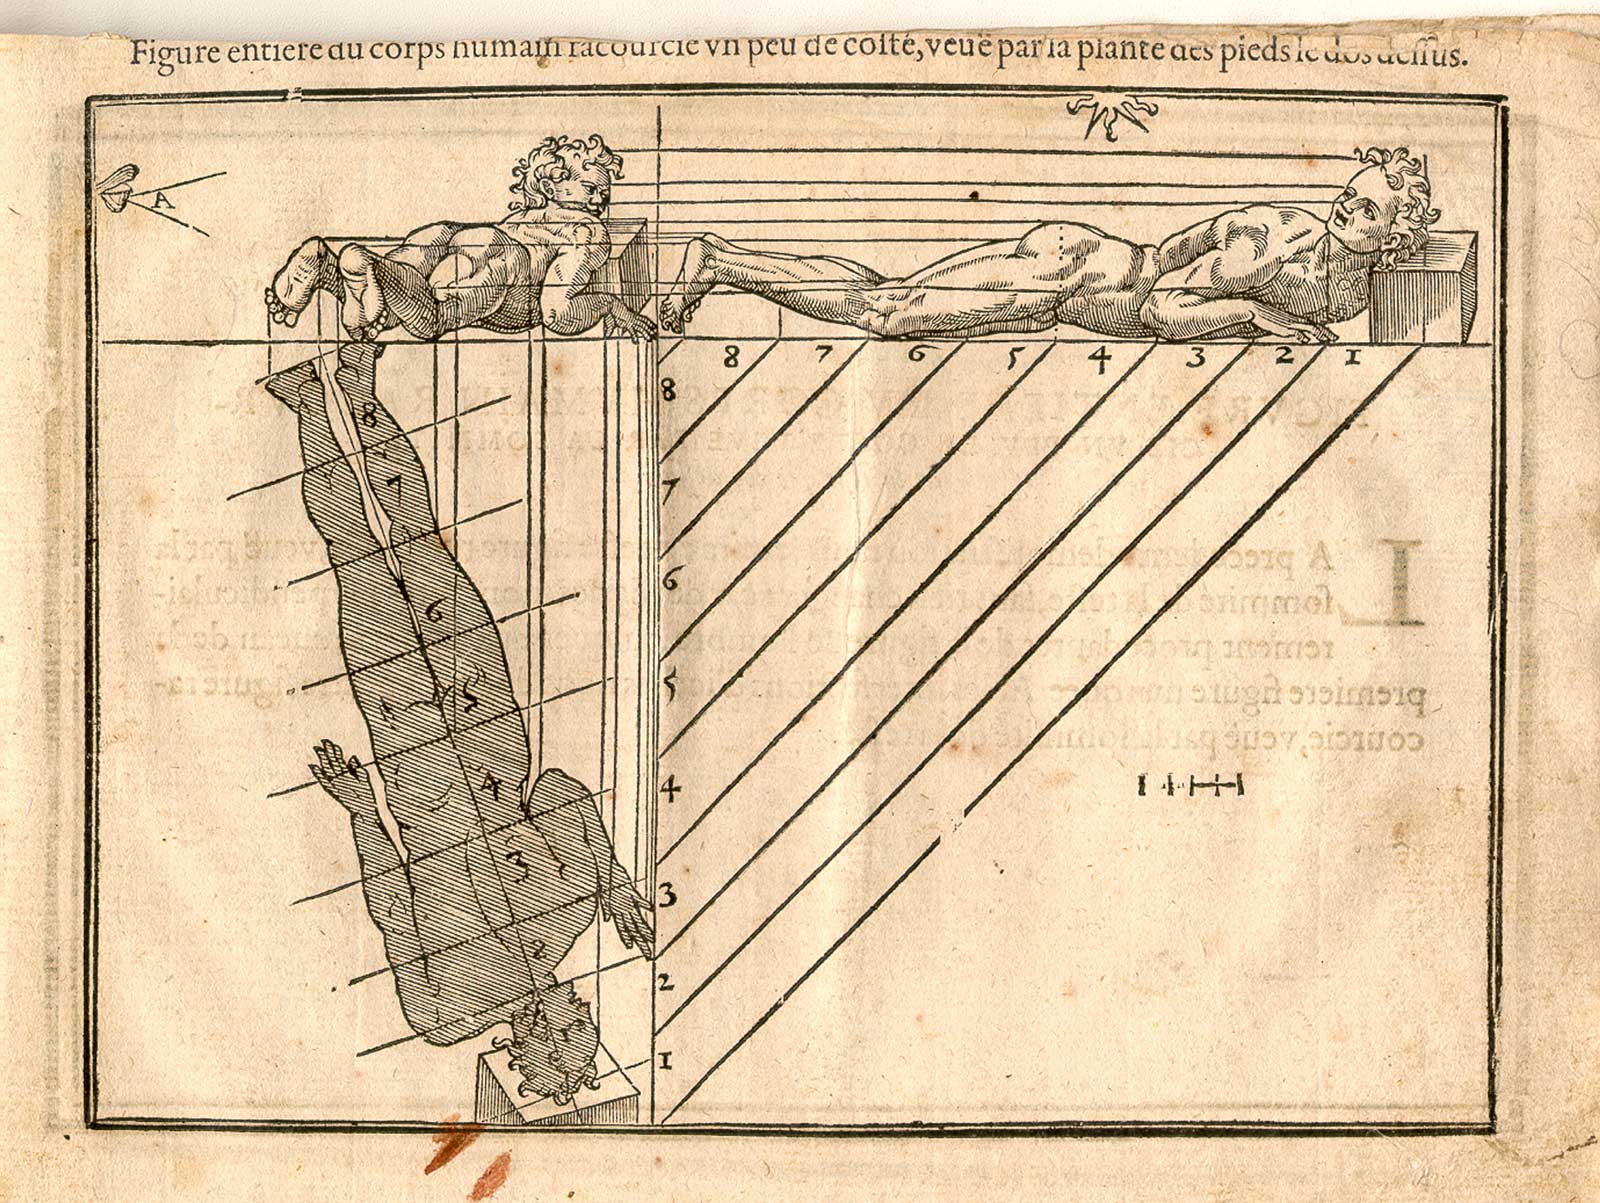 Woodcut illustration of two nude male anatomical figures lying down on their stomachs on a flat surface, viewed from the side and from the feet, both images in identical poses, both images showing the proportions of the figure measured out, from Jehan Cousin’s Livre de pourtraiture, NLM Call no.: WZ 250 C8673L 1608.